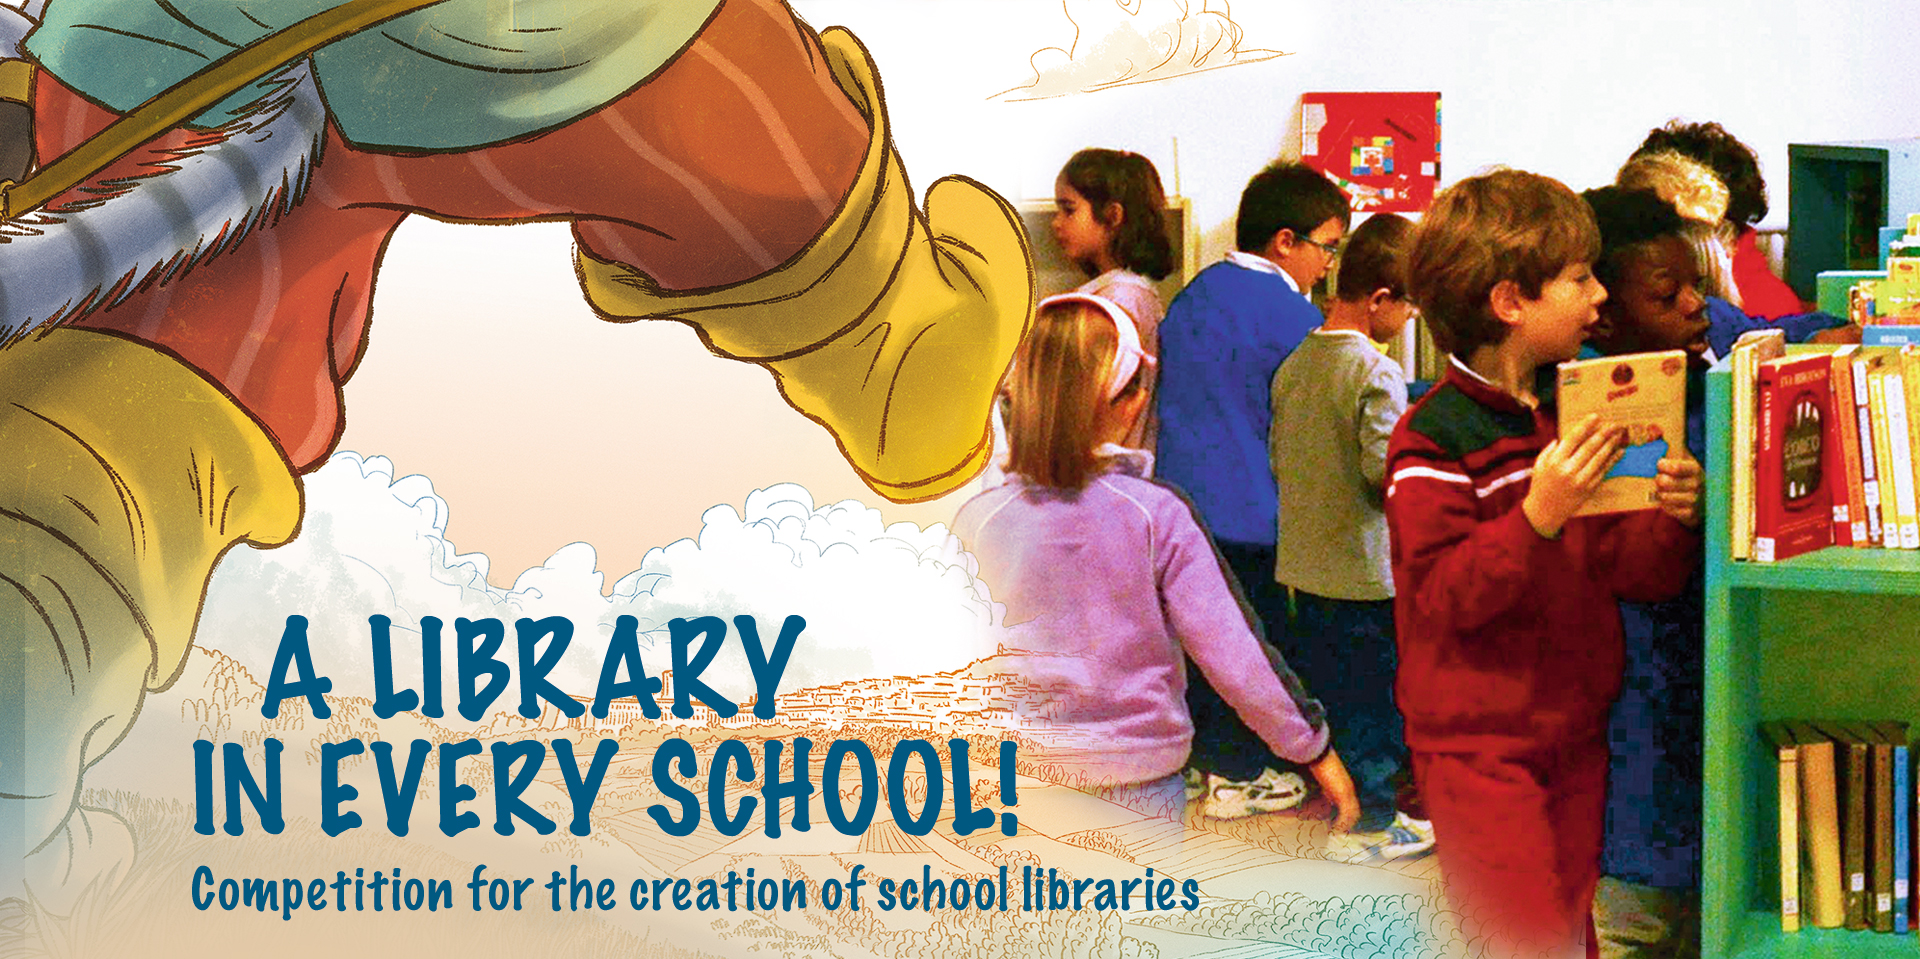 Competition for the creation of school libraries “A Library in Every School” - Birba Assisi Italy